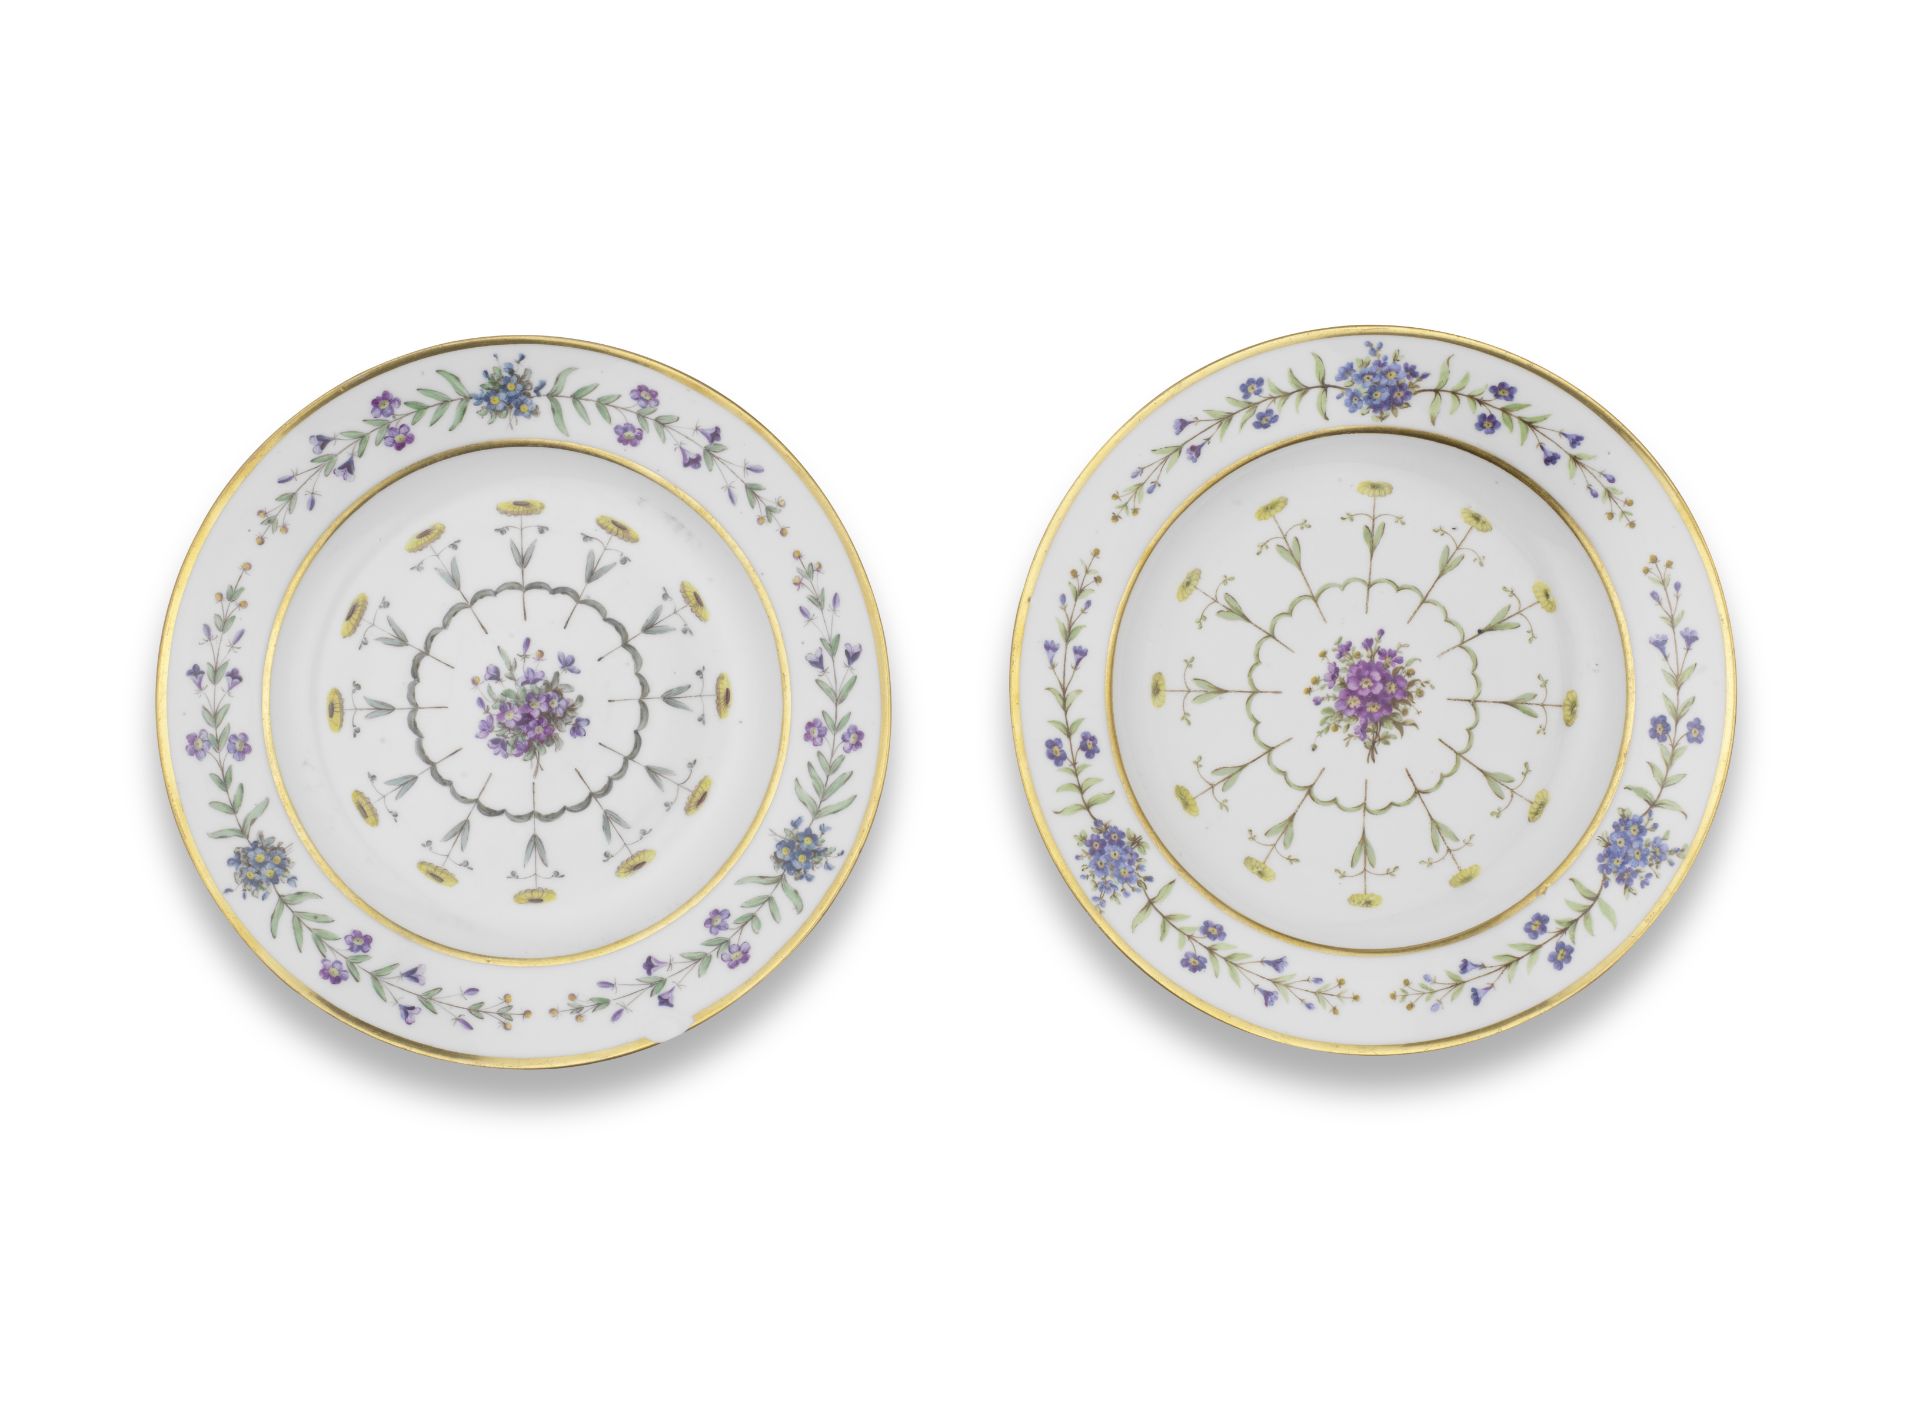 Two plates from the 'service fleurette' given by Napoleon I to M. Fran&#231;ois, former Bishop o...